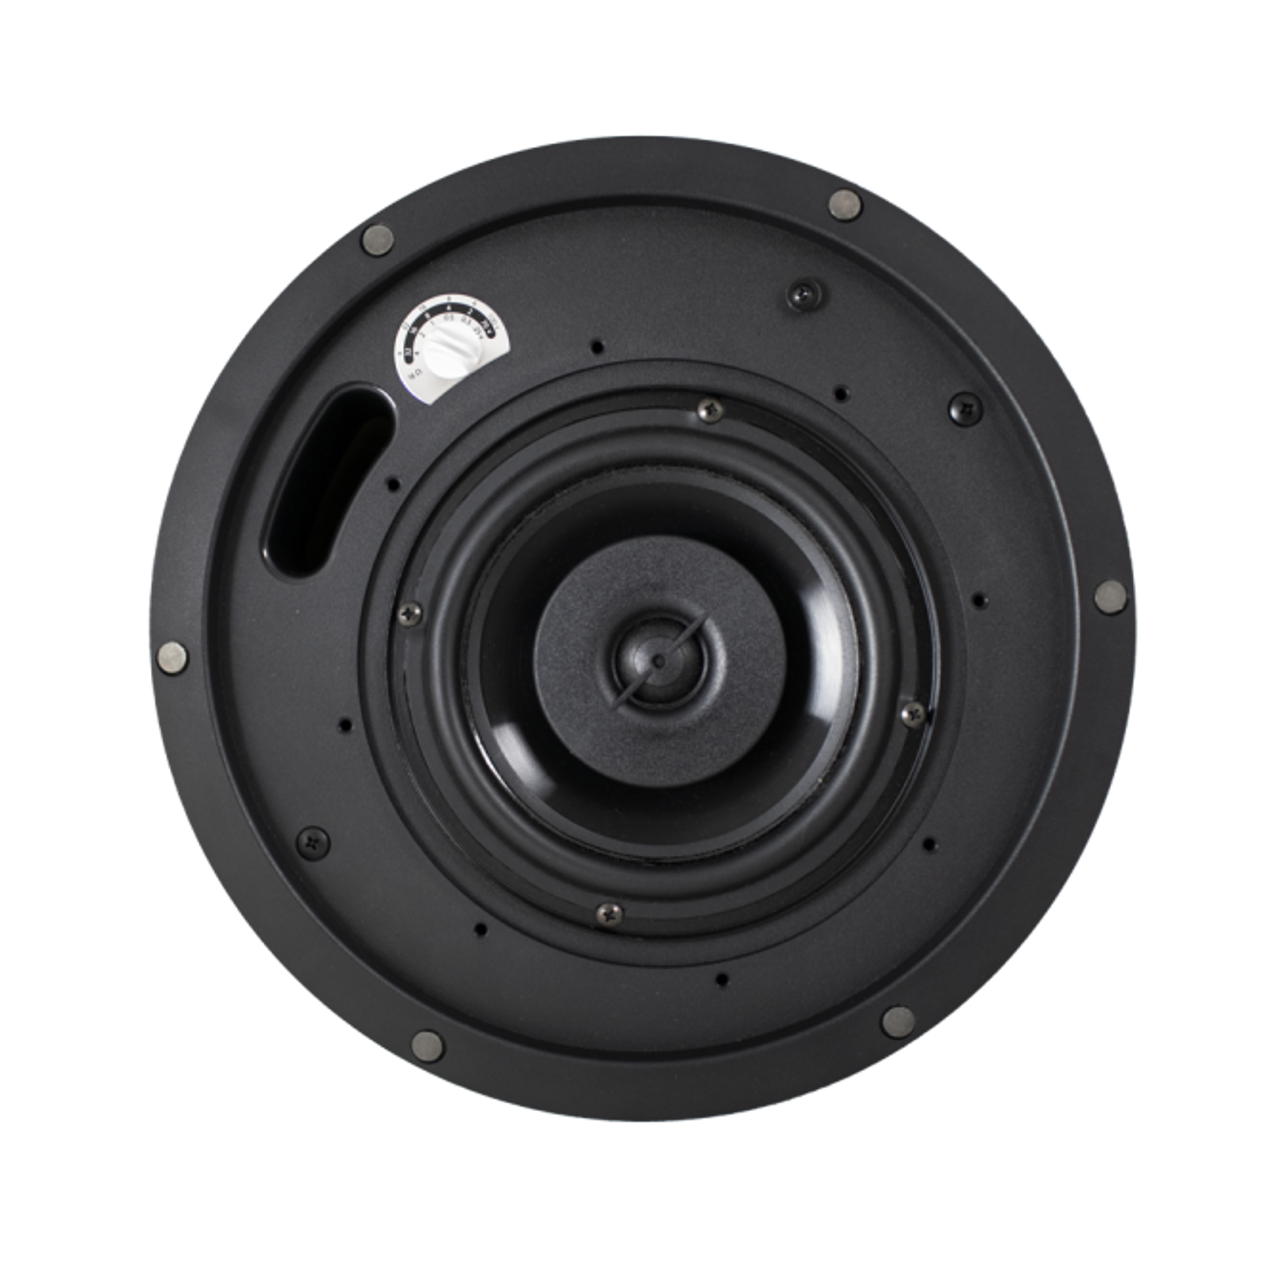 SoundTube CM62-BGM-II-WH 6.5" In-Ceiling Background Music Speaker with White Seamless Magnetic Grille (CM62-BGM-II-WH)